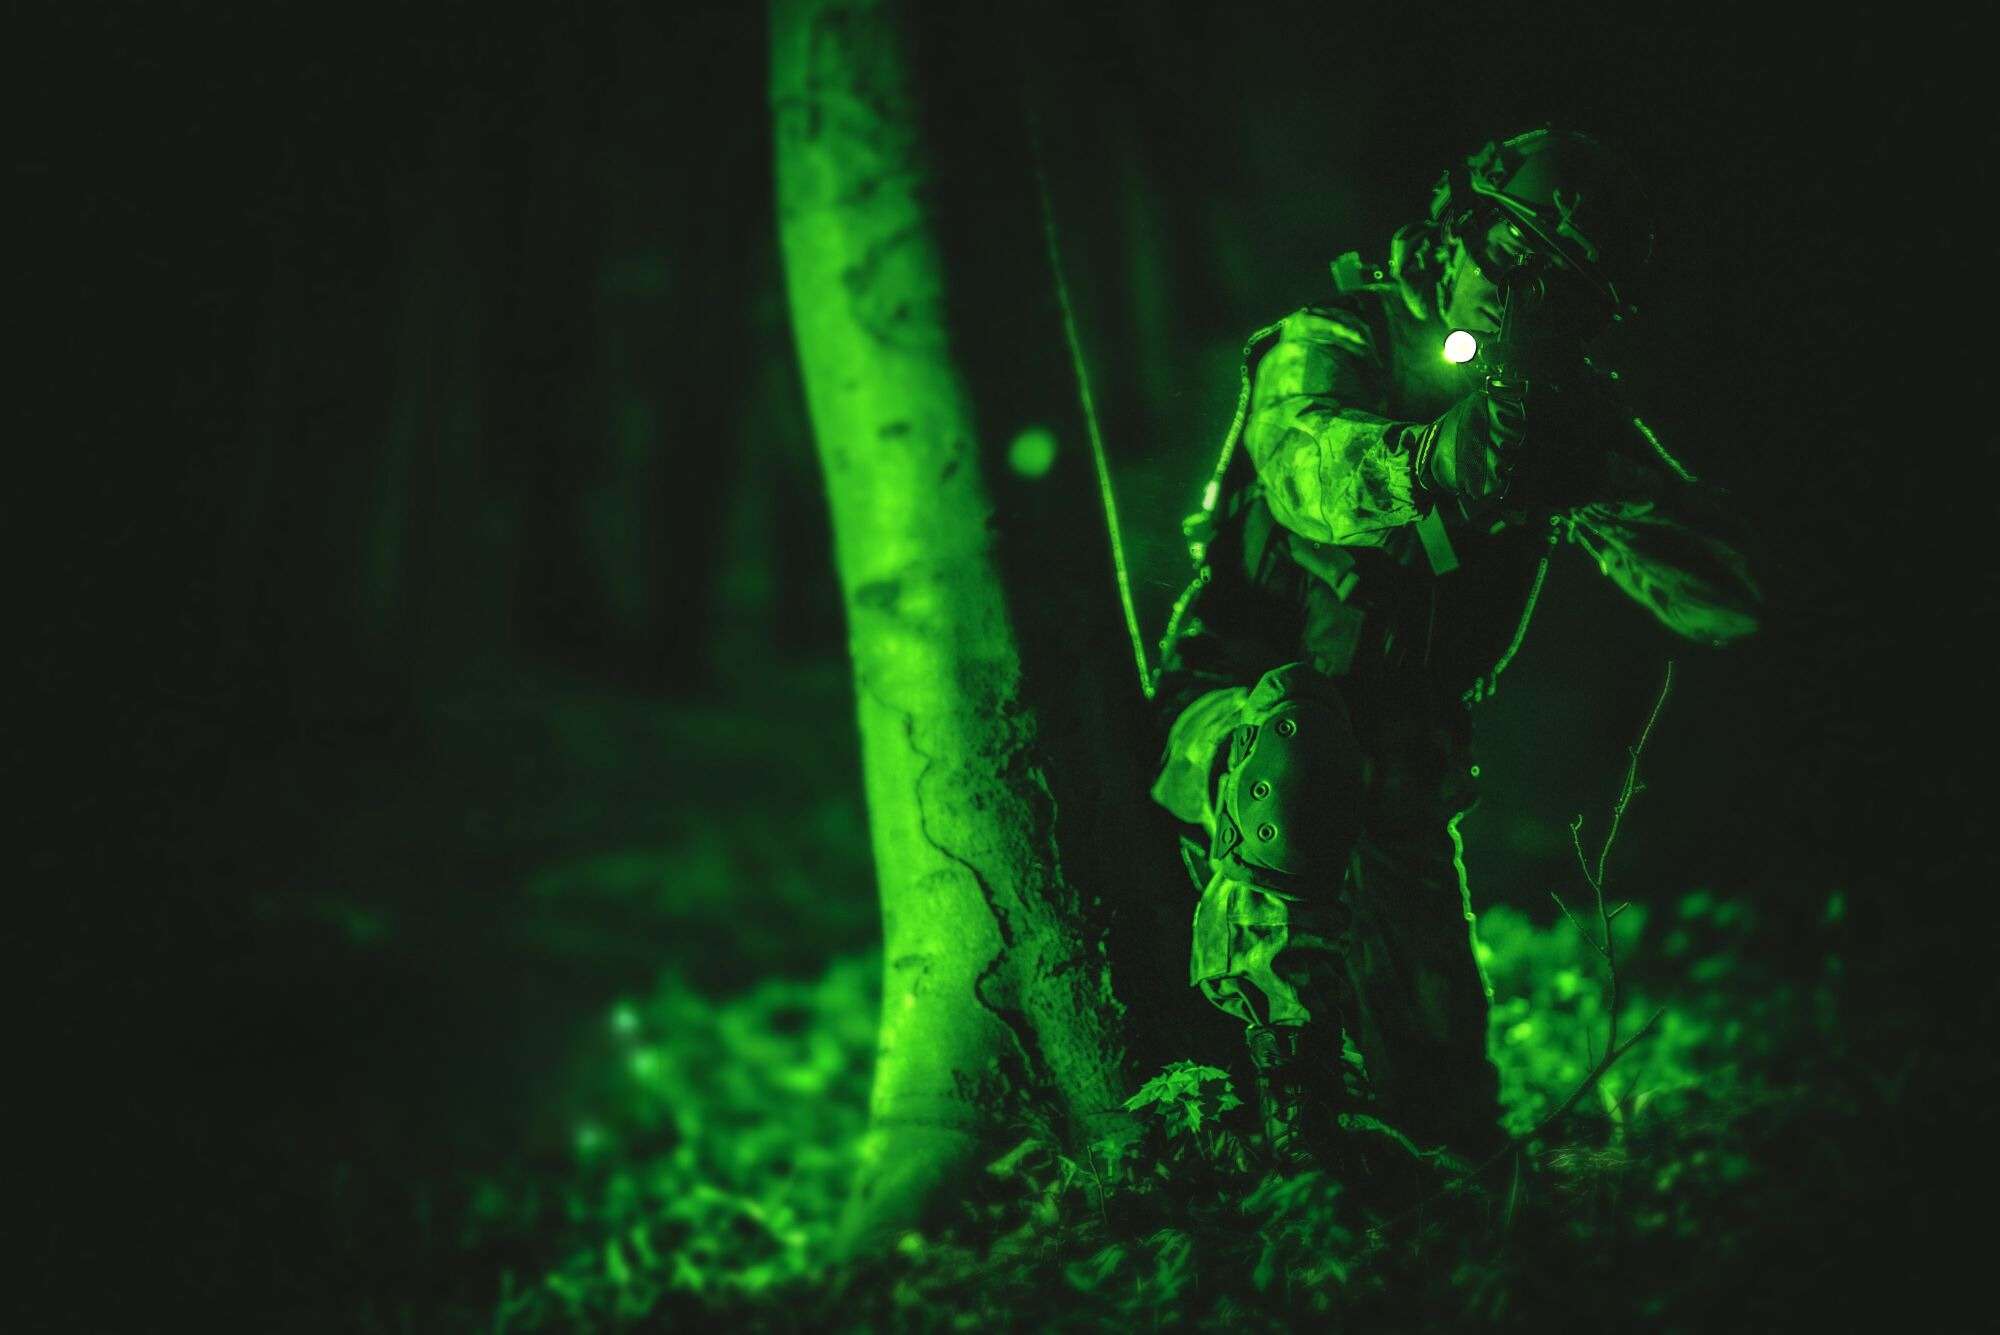 What is Generation 1 night vision?